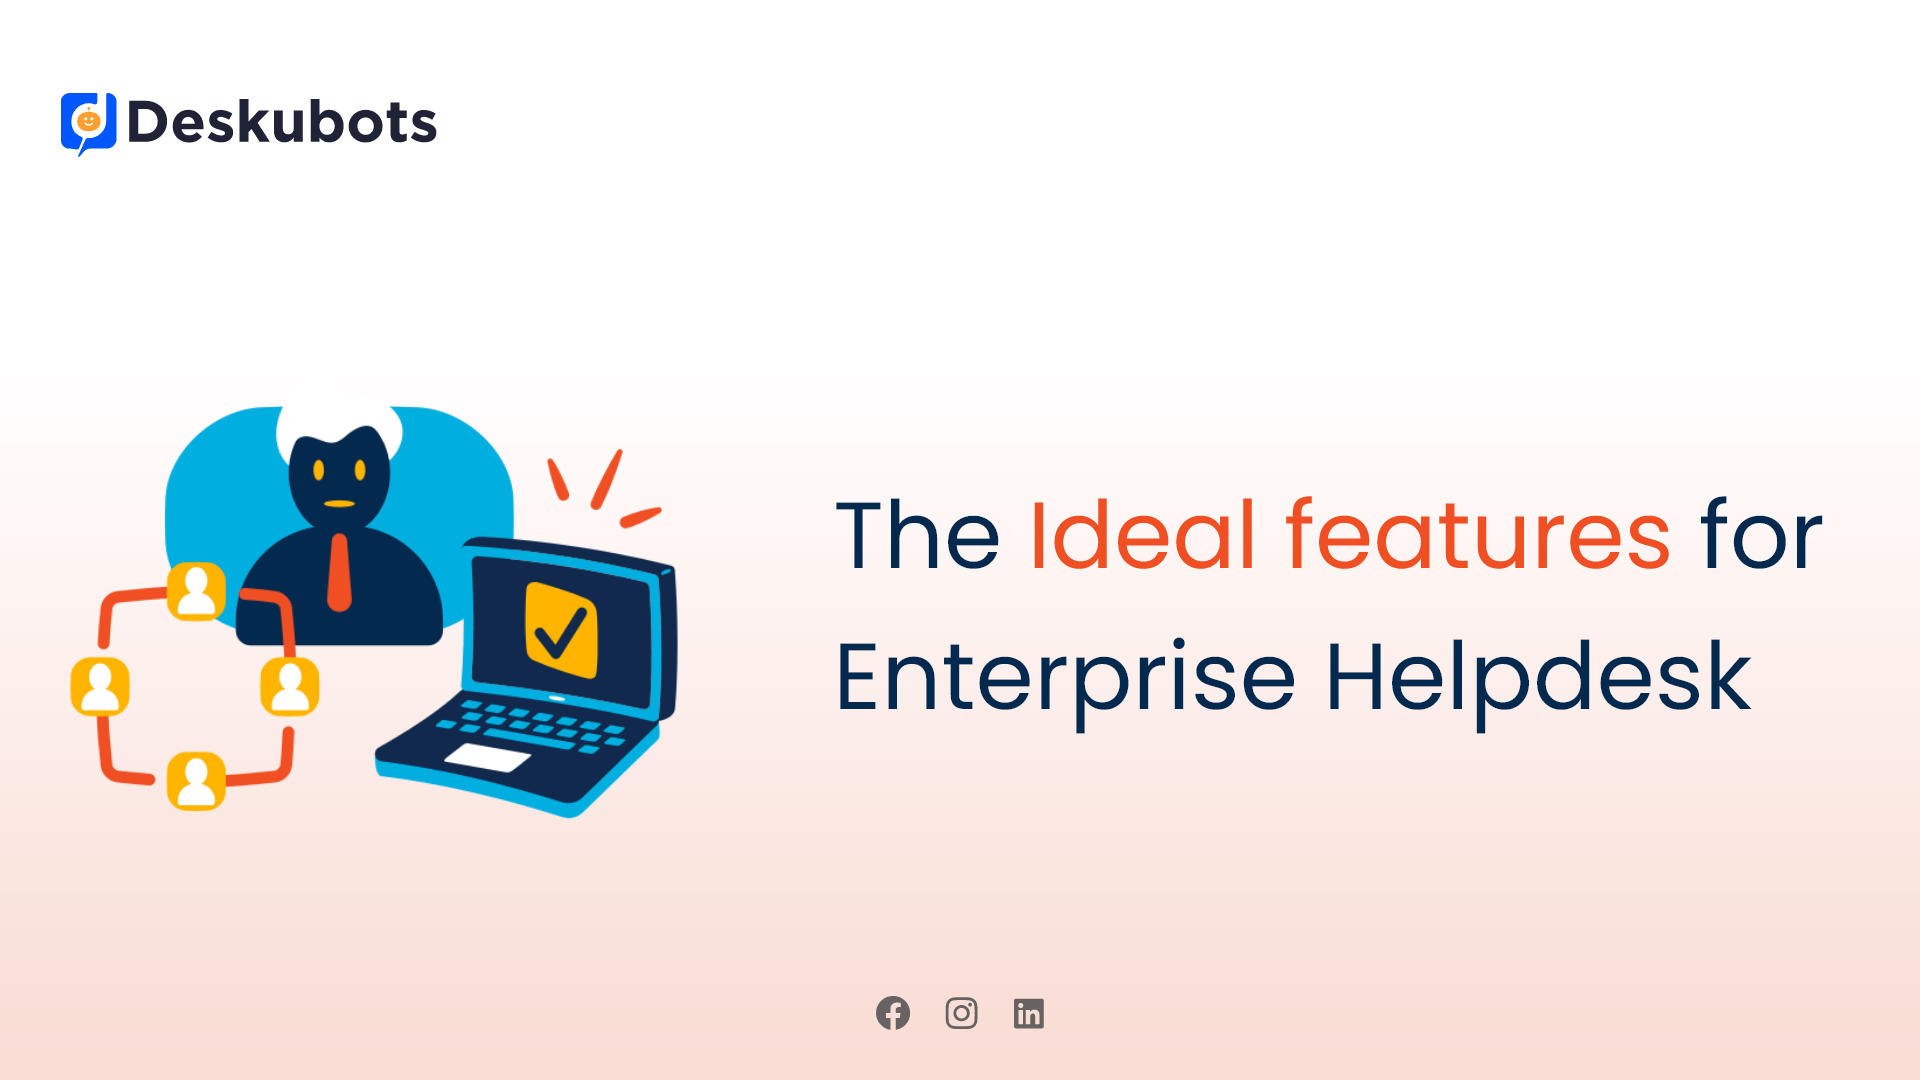 The ideal features for enterprise helpdesk